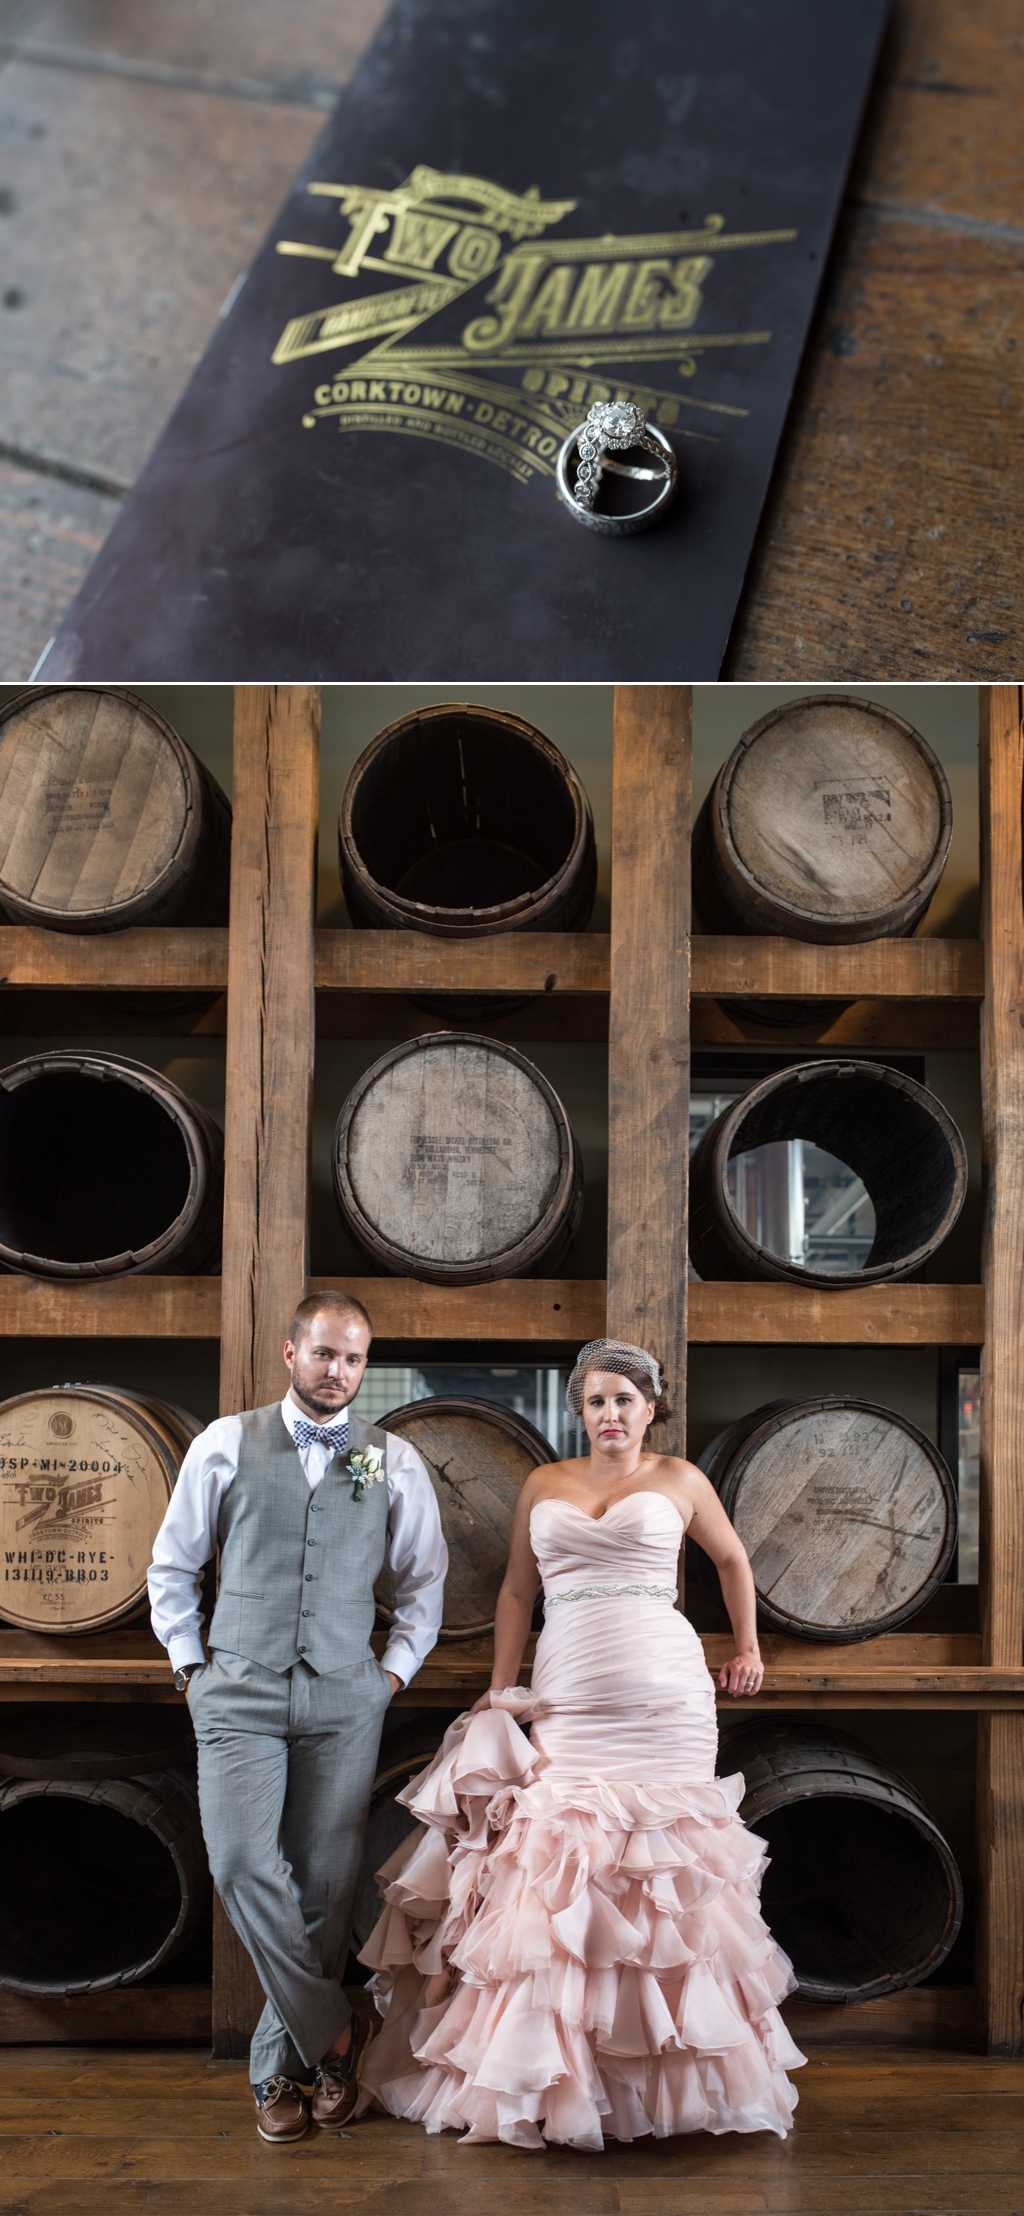 Detroit Elopement Session at Two James Distillery